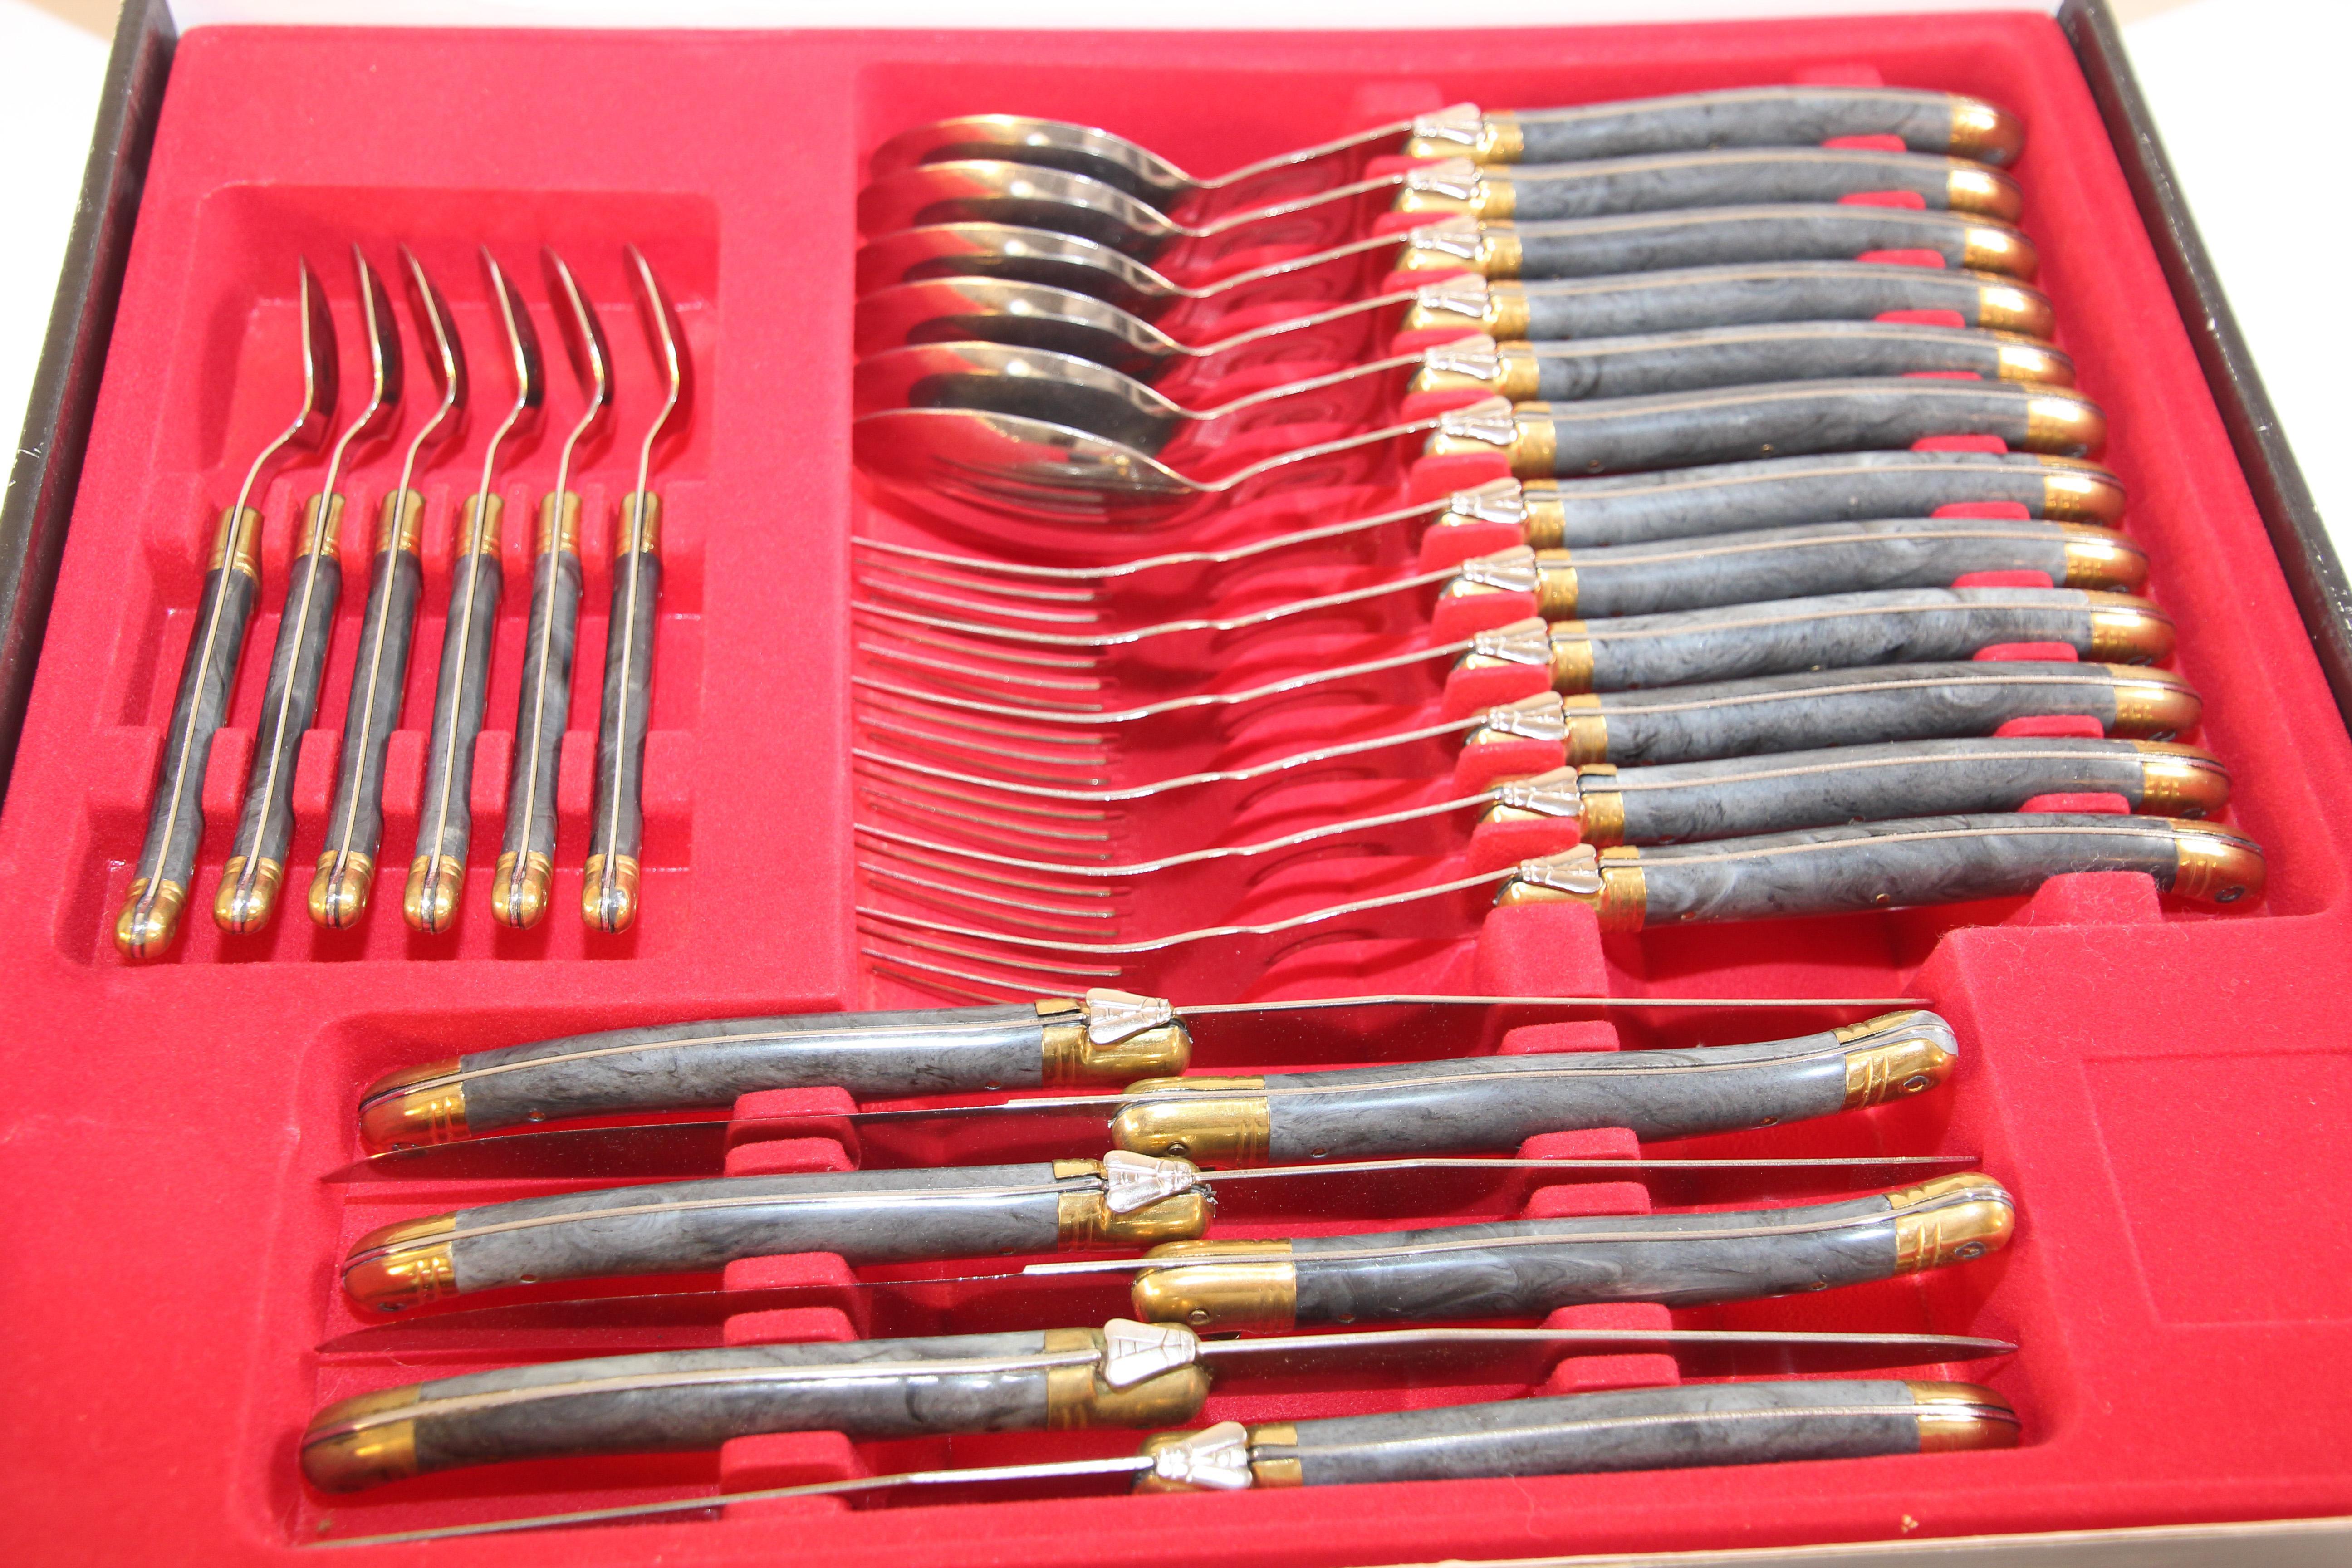 Vintage Laguiole de France 24 piece flatware set.
French maker Laguiole may be most well-known for their elegant, handcrafted knives, complete with arched blades and bee-adorned handles, 
World renowned knives from the Midi-Pyrenees region of